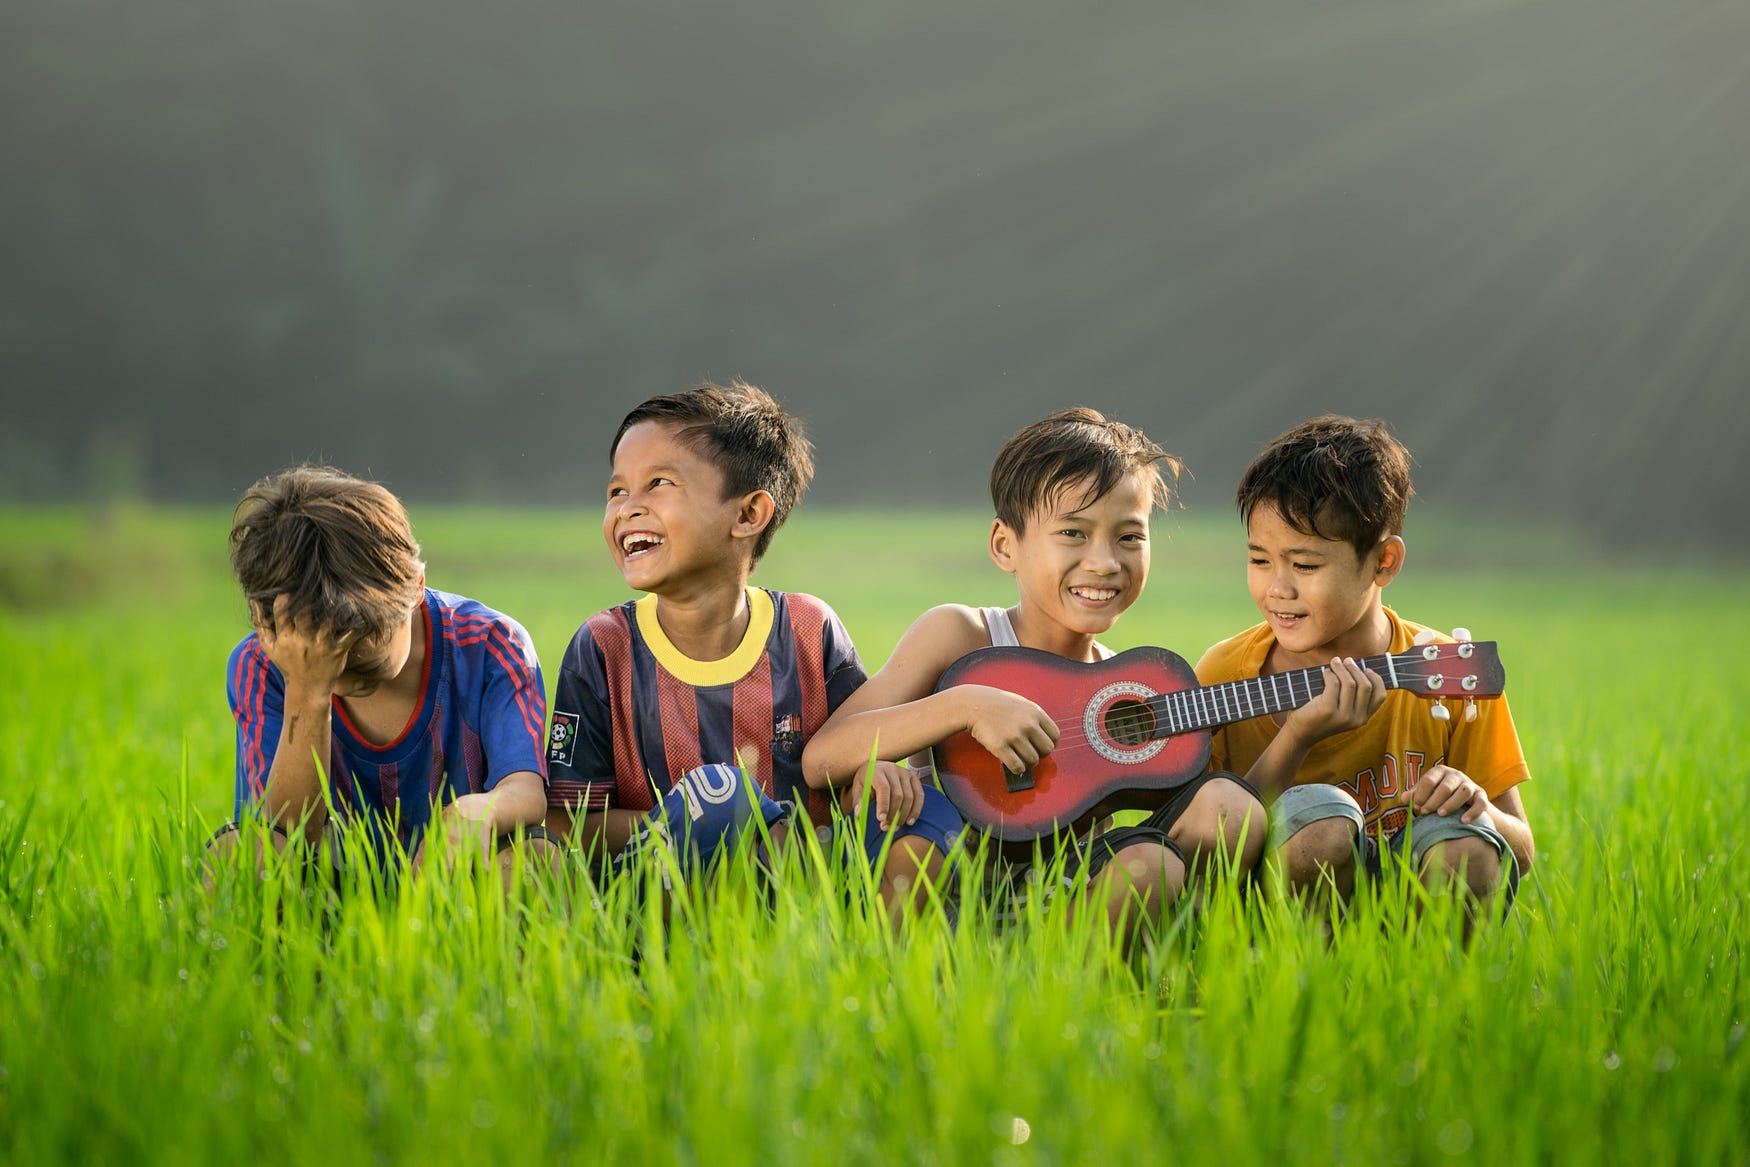 Little boys having fun and playing music.